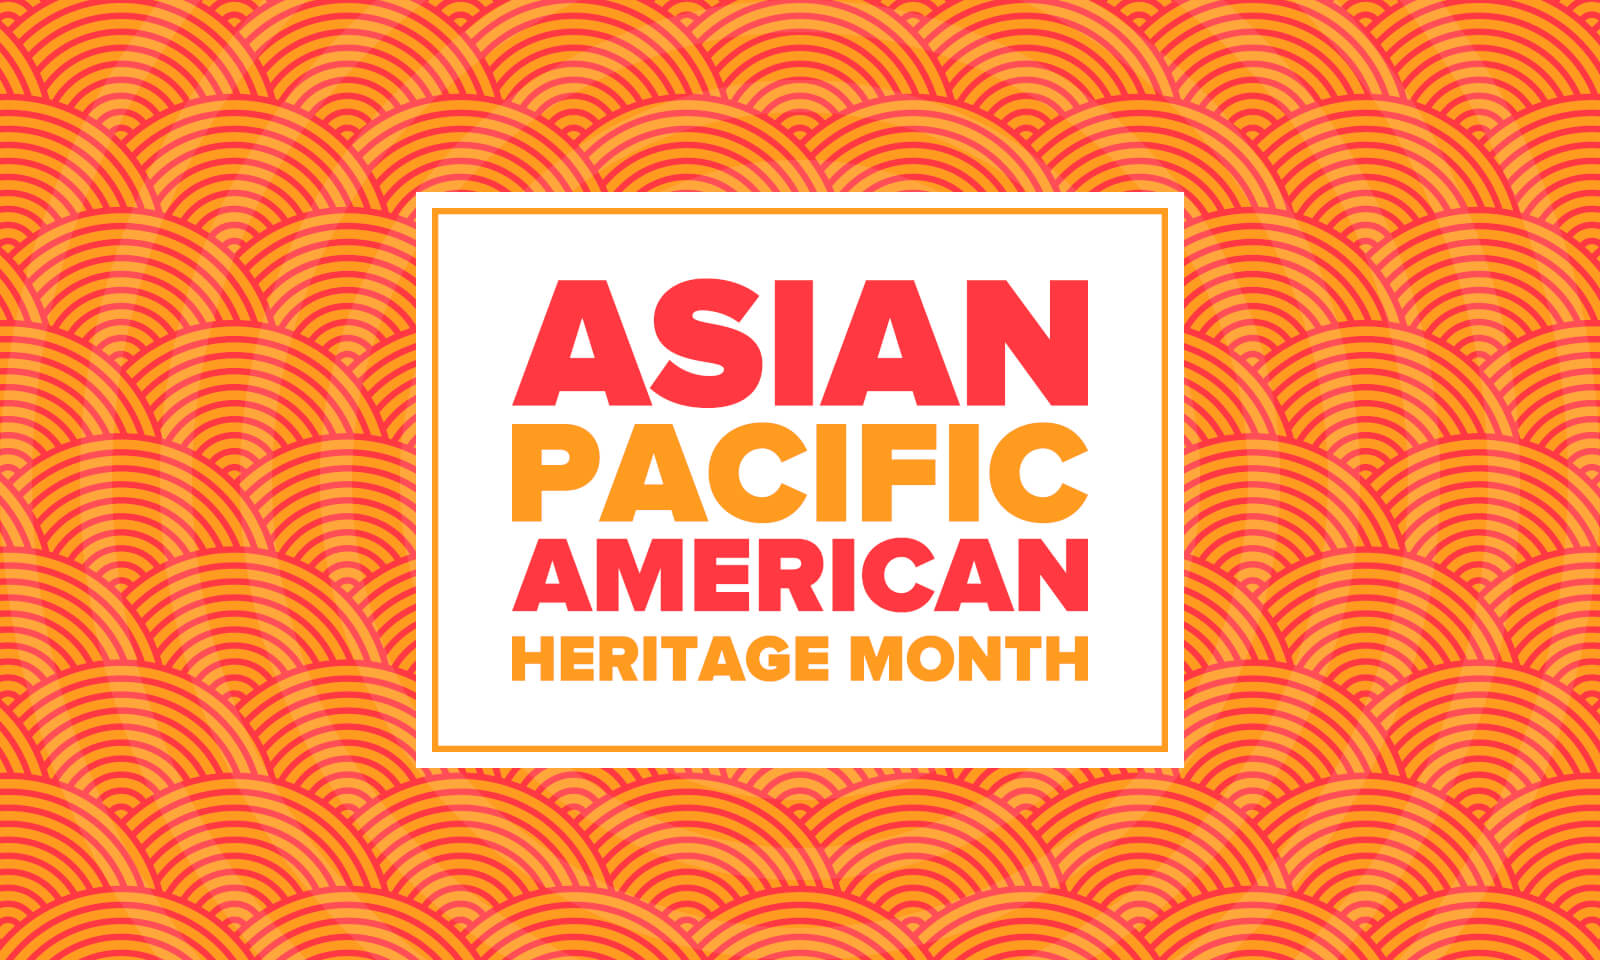 Asian American and Pacific Islander Athletes in Track and Field